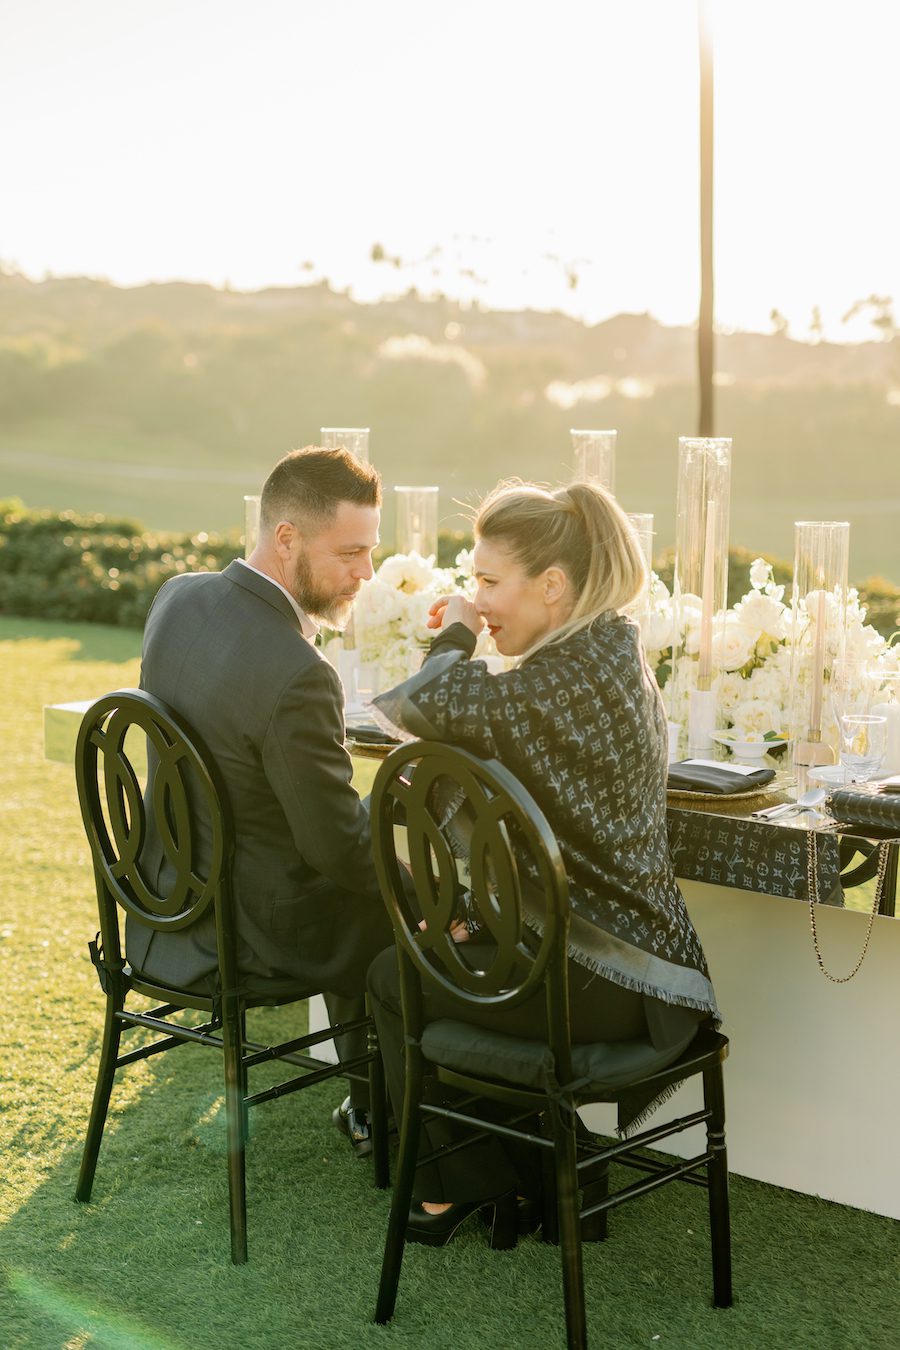 Tears shed as she takes in this breathtaking luxury 20 year anniversary and ocean view set up